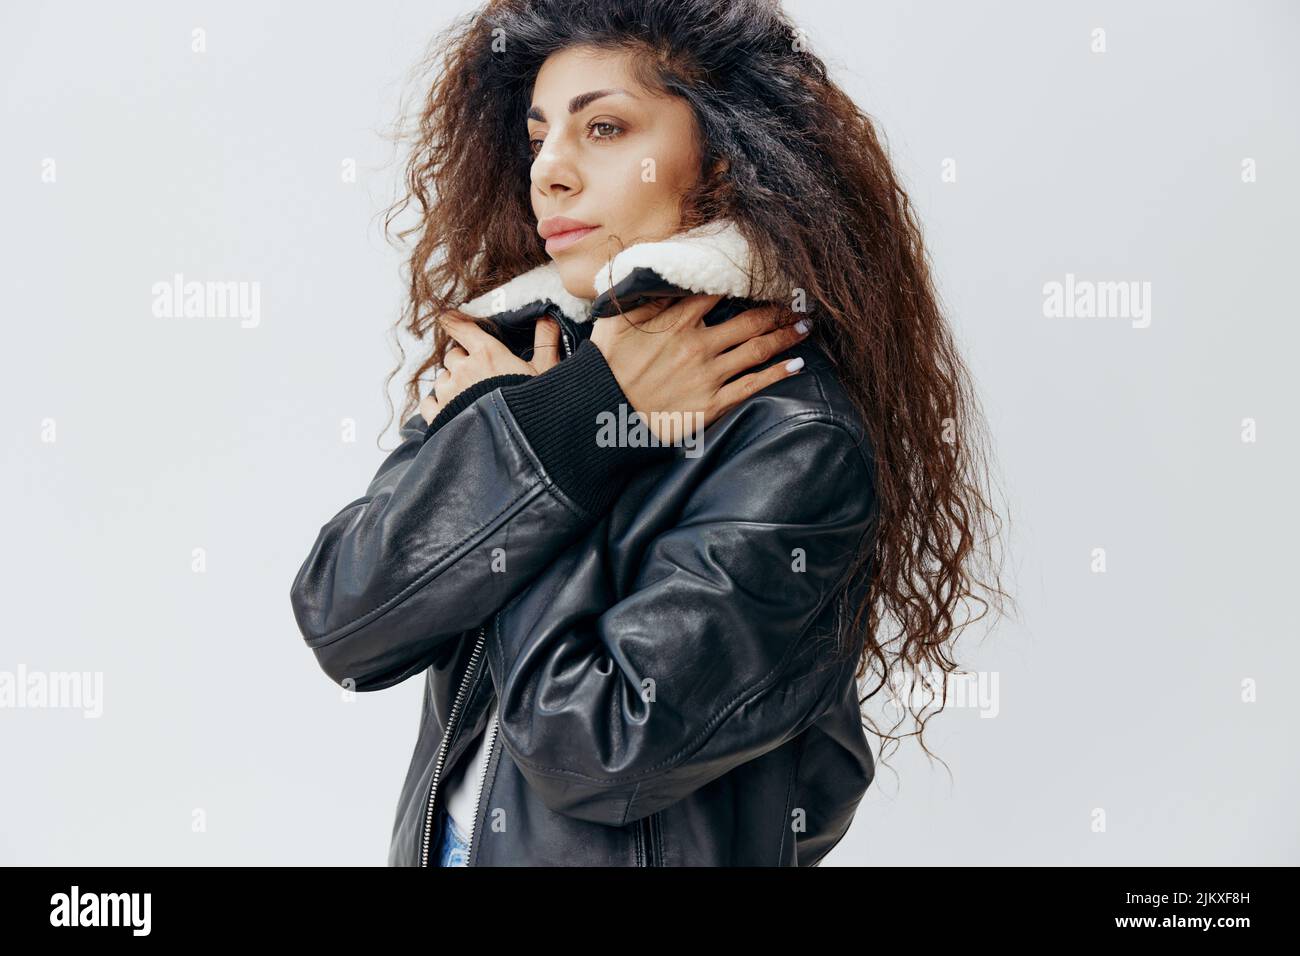 Thoughtful Curly Pretty Latin Lady Wrapping In Warm Leather Black Jacket With Fur Collar Looking Aside Posing Isolated At White Studio Background Stock Photo